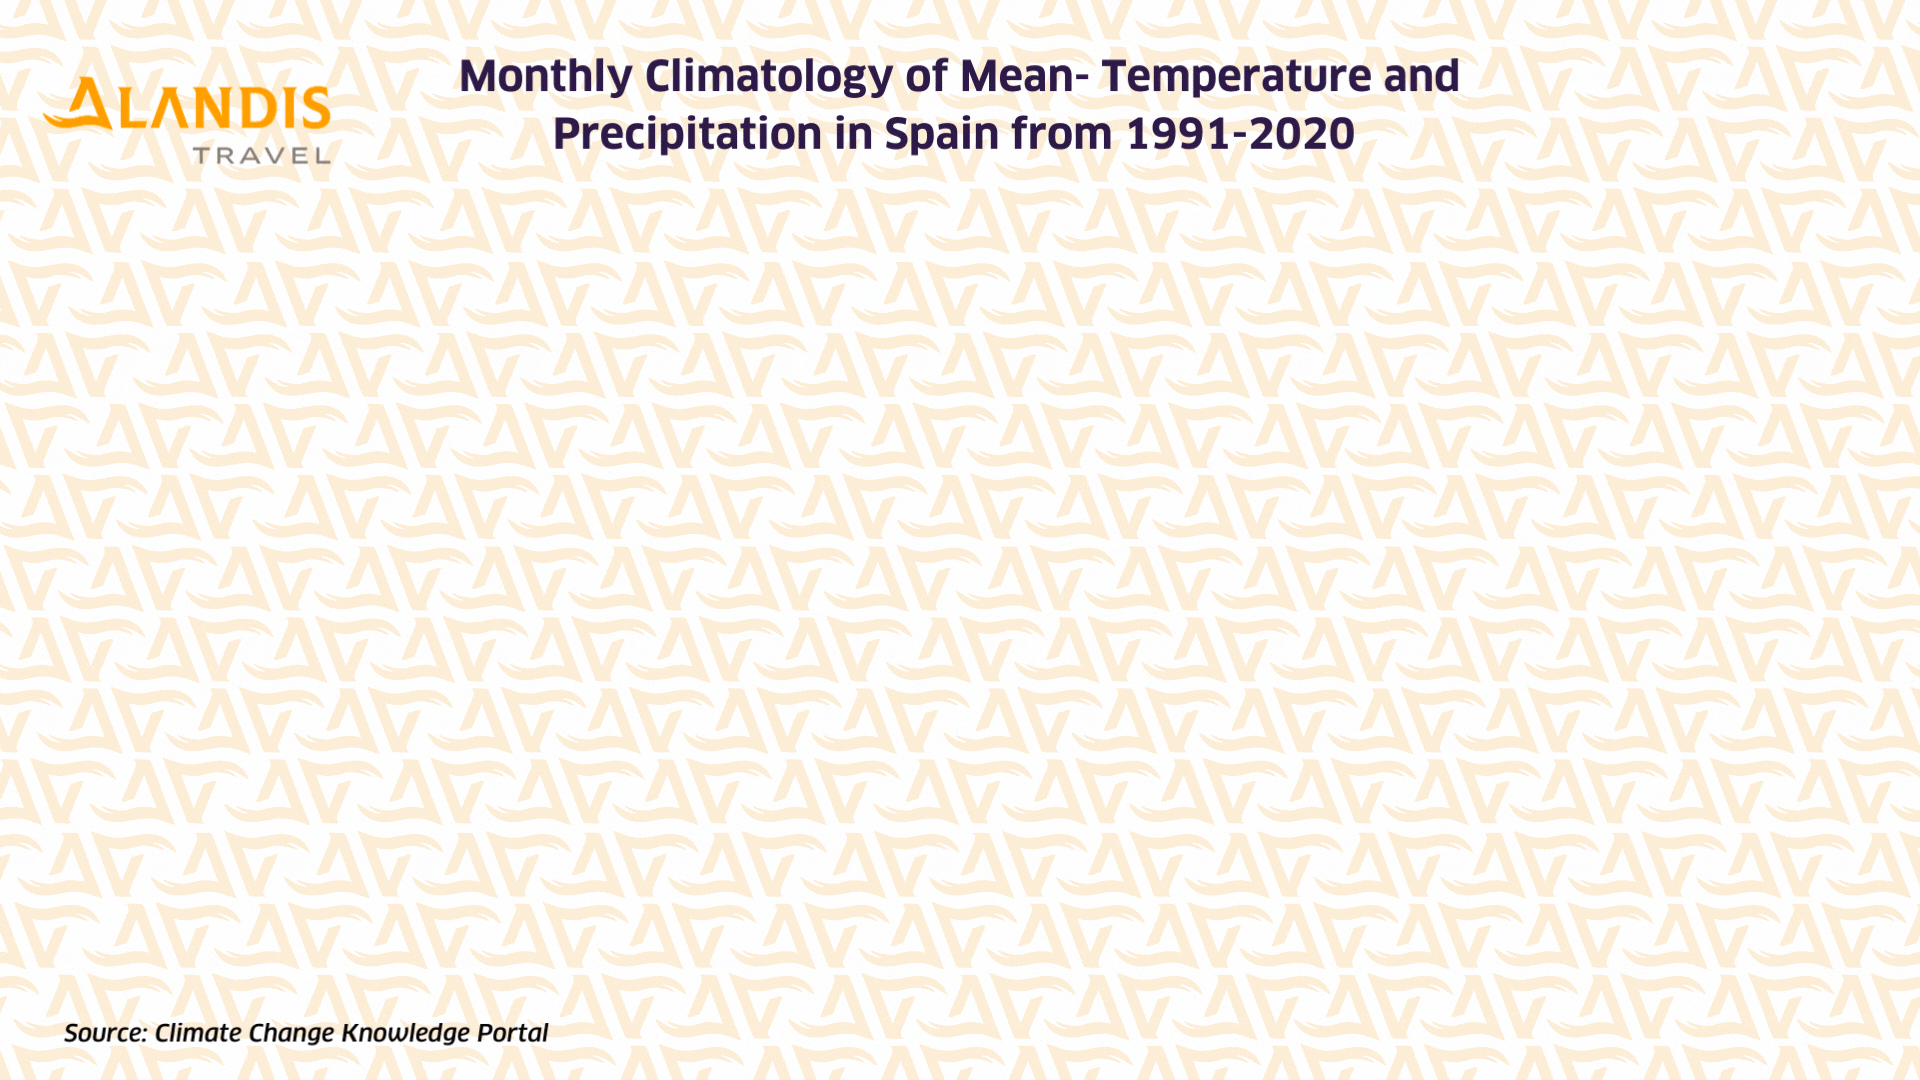 Monthly climatology of mean temperature and precipitation in Spain from 1991-2020